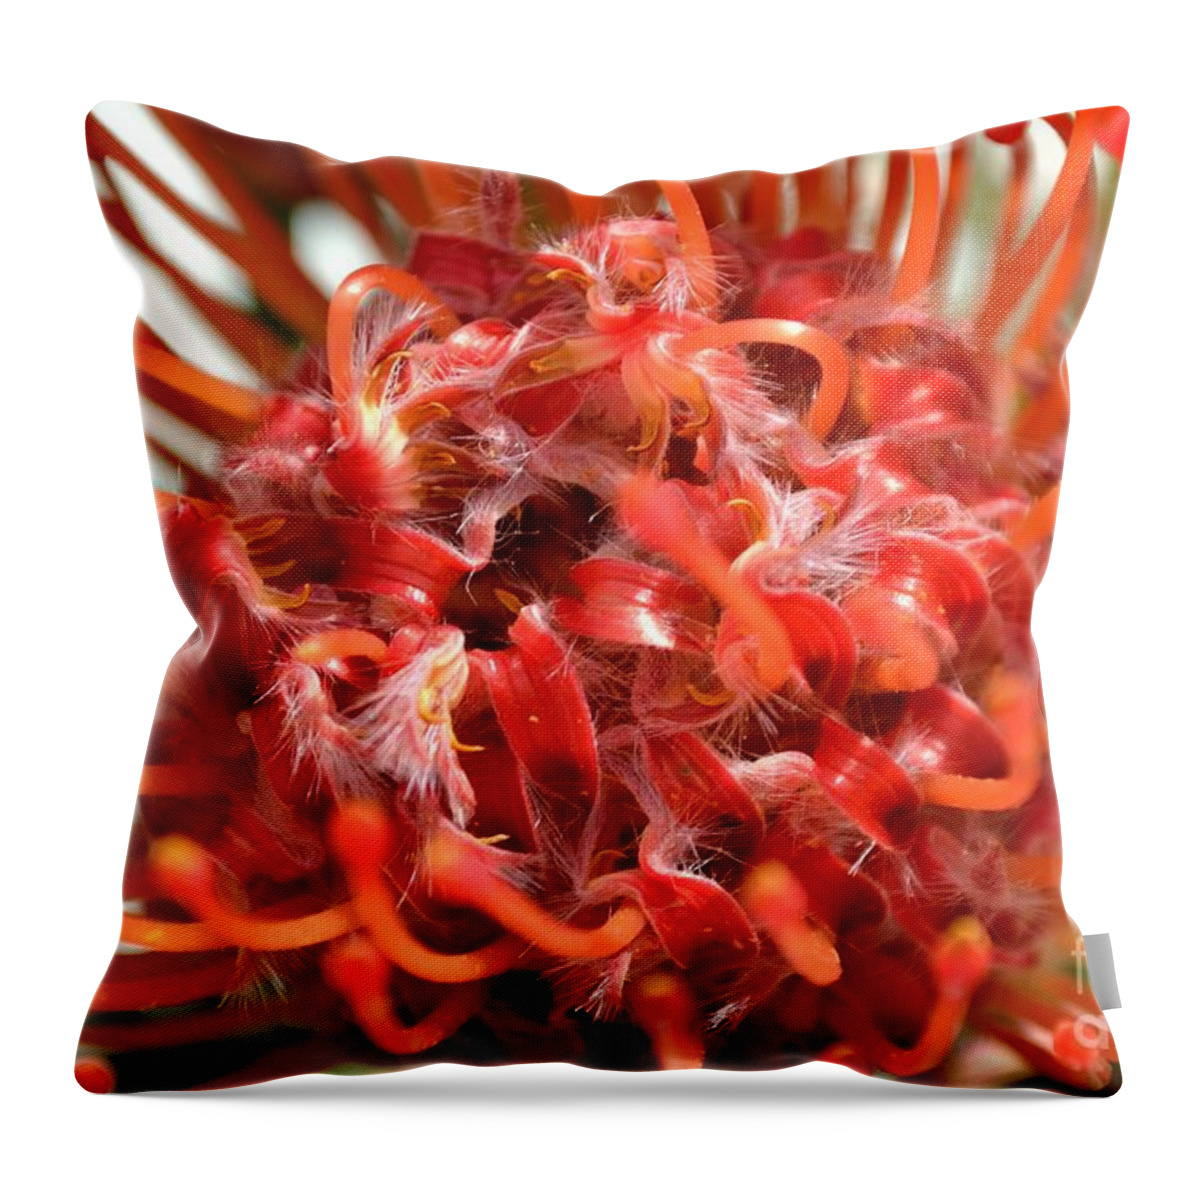 Red Throw Pillow featuring the photograph Red Pincushion Close Up by Scott Lyons